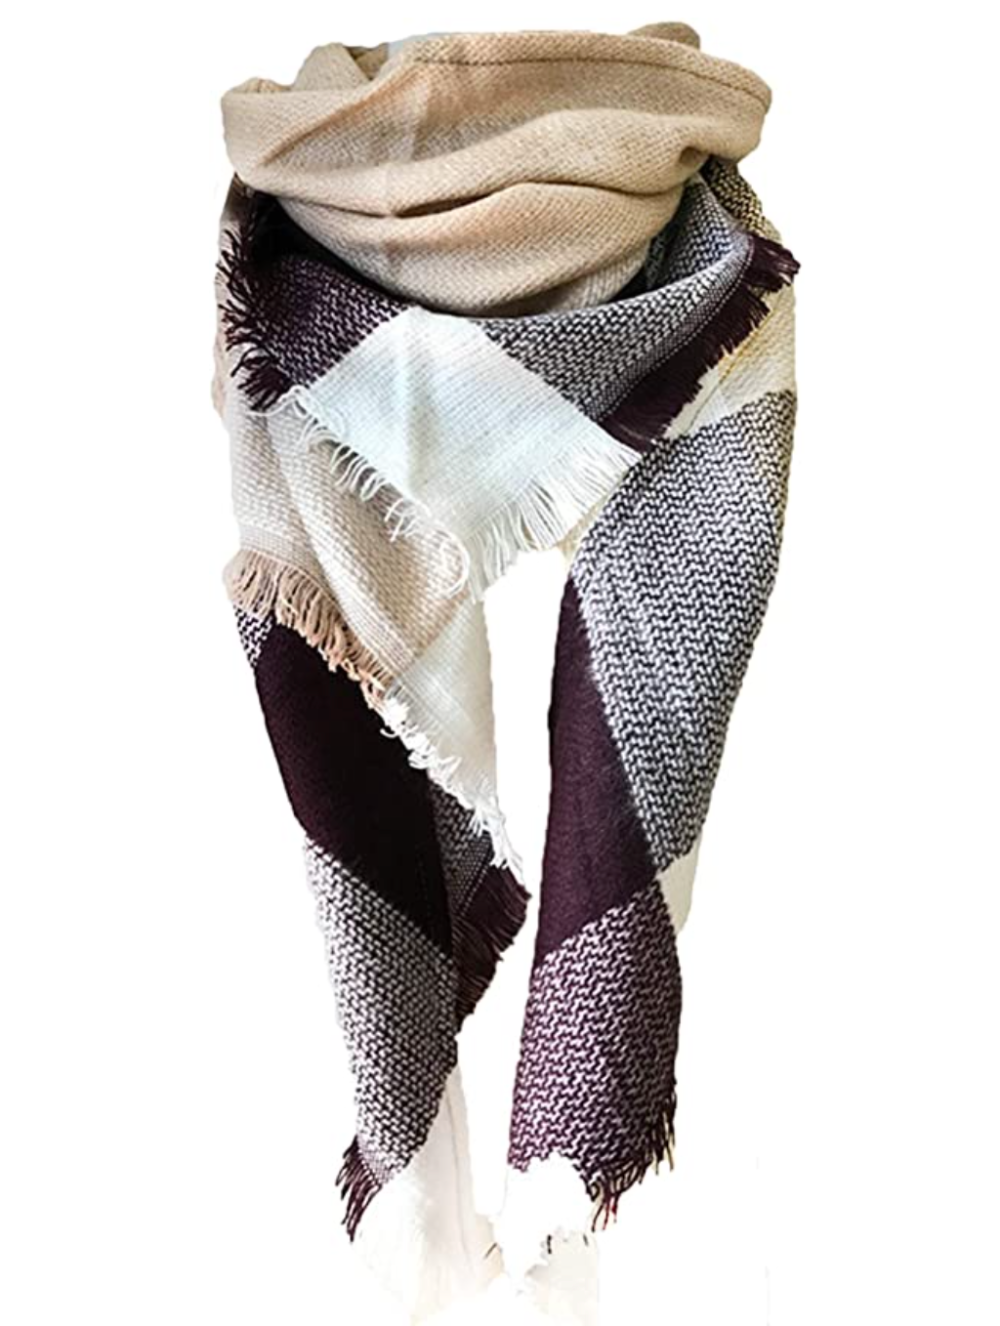 Wander Agio Bestselling Scarf Starts at $13 and Feels Like Cashmere